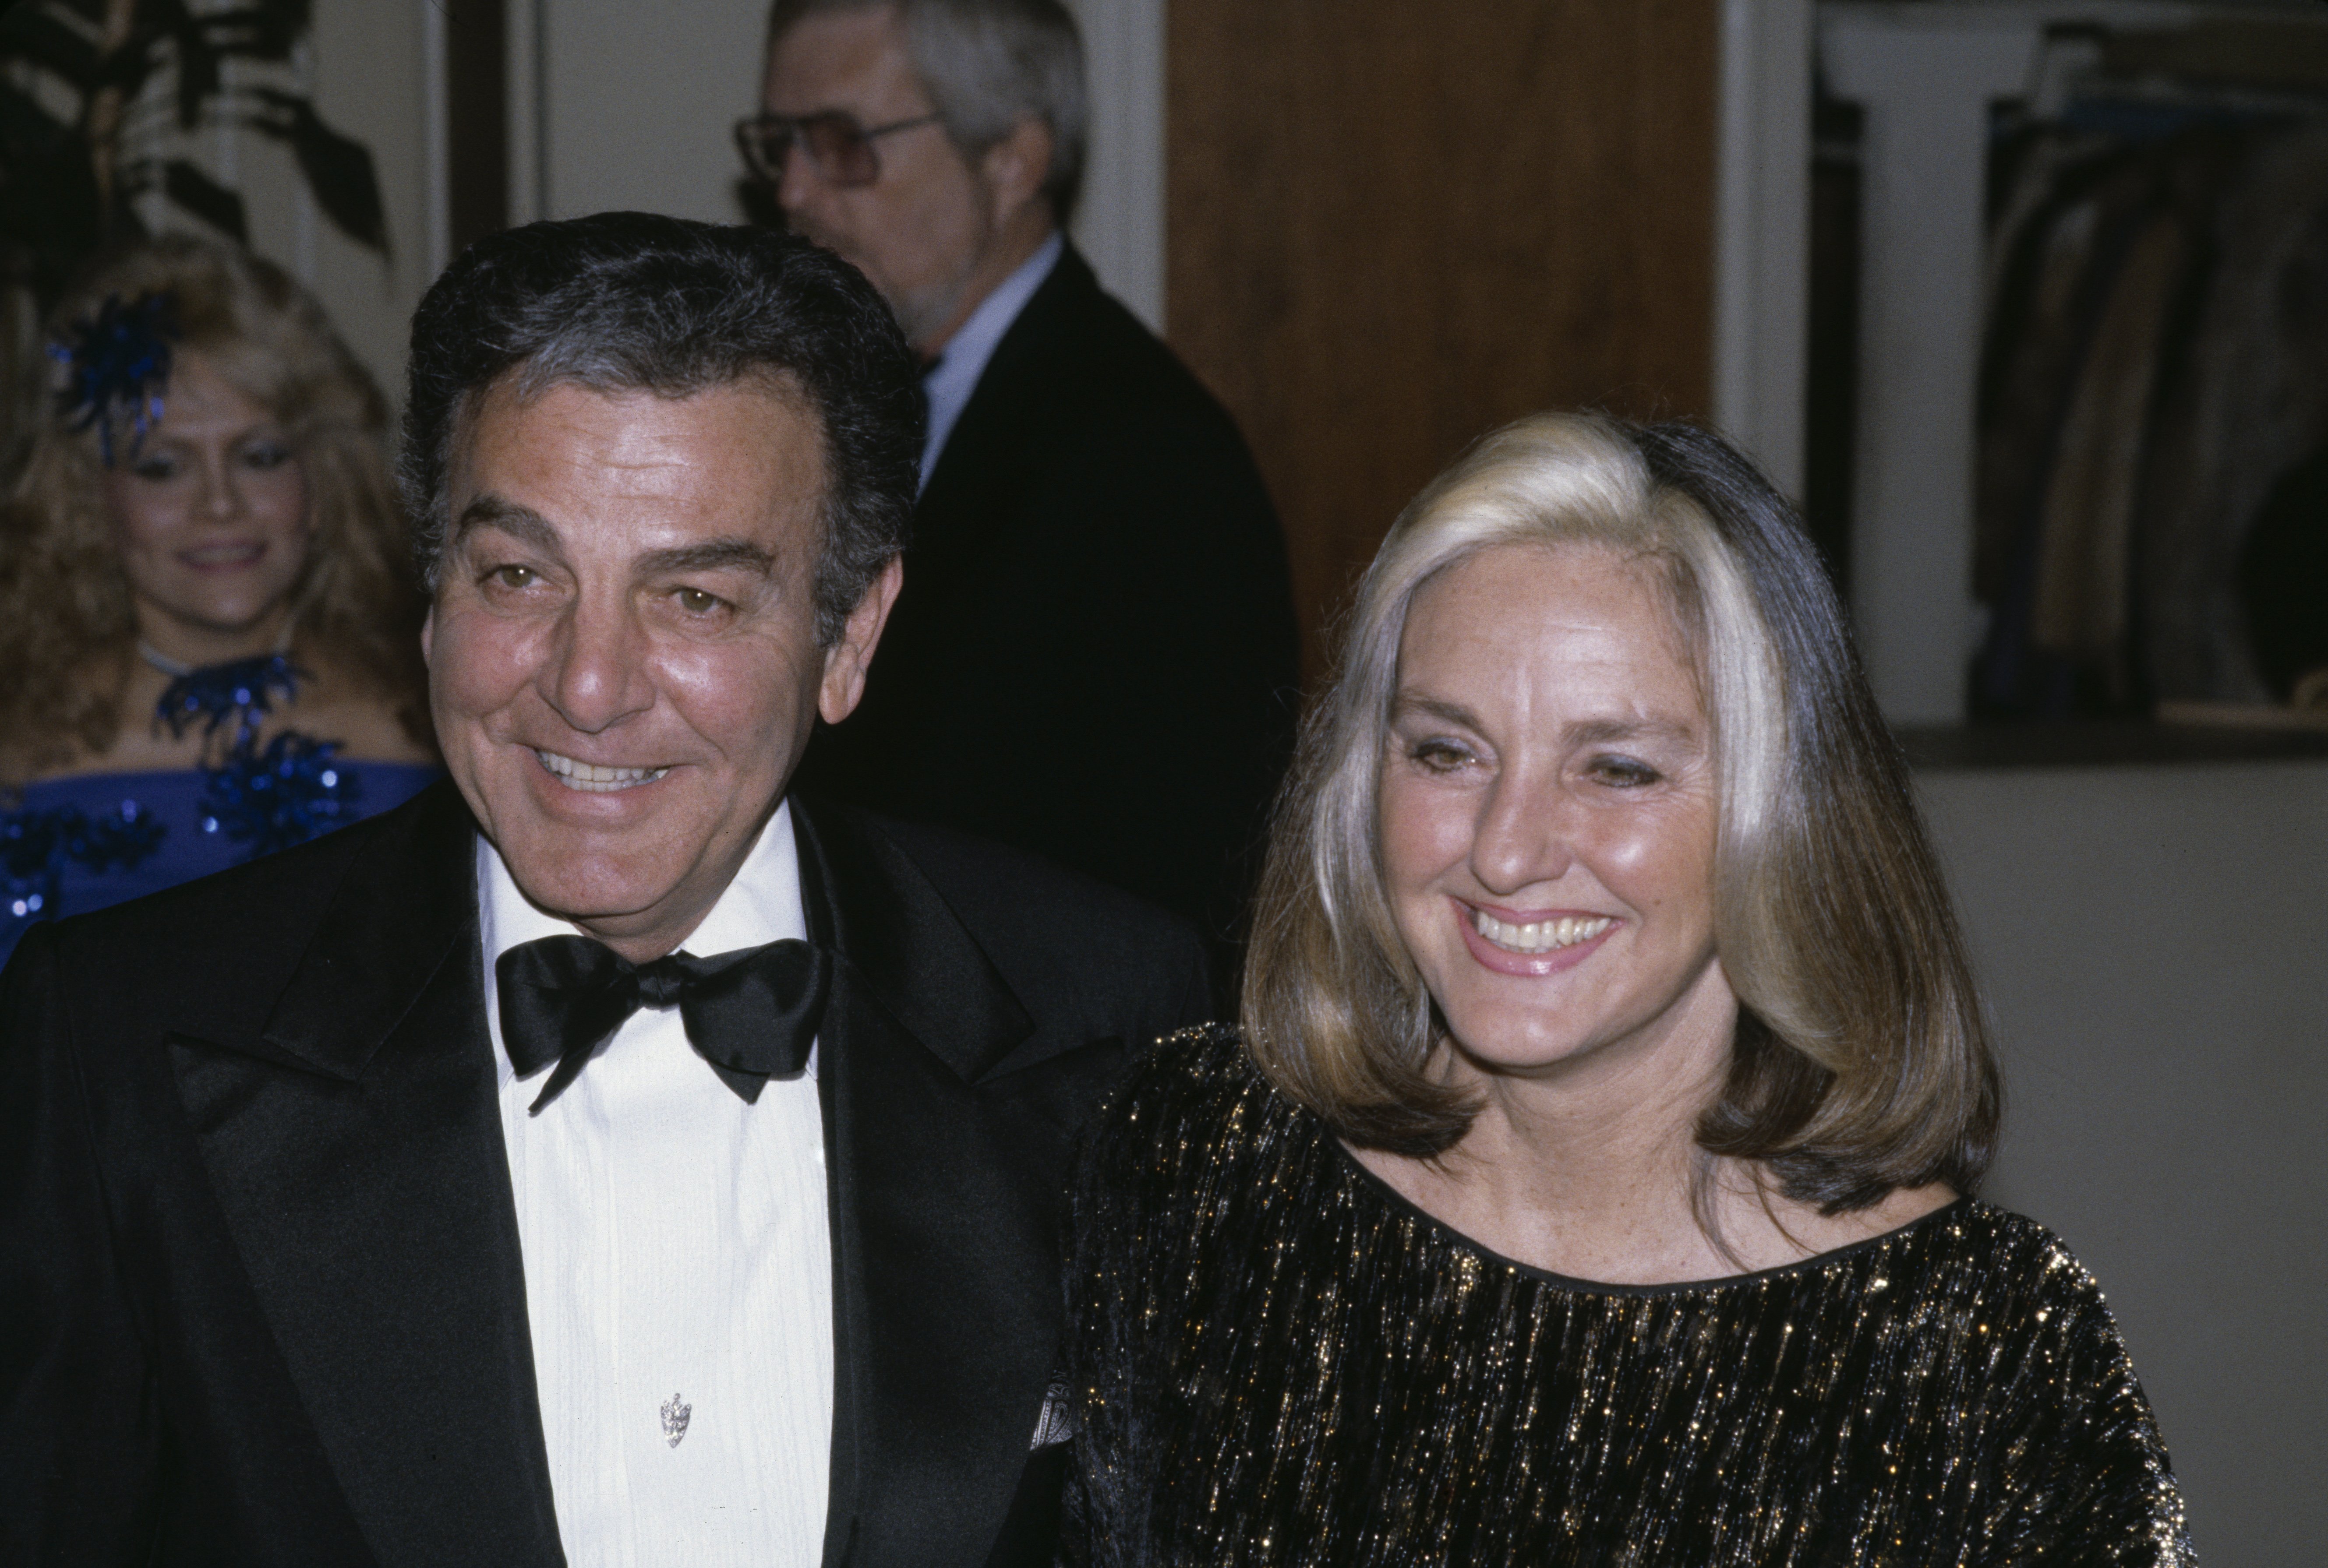 American actor Mike Connors and wife Mary Lou Willey attend the 40th Annual Golden Globe Awards held at the Beverly Hilton Hotel in Beverly Hills, California on January 29, 1983 |  Source: Getty Images